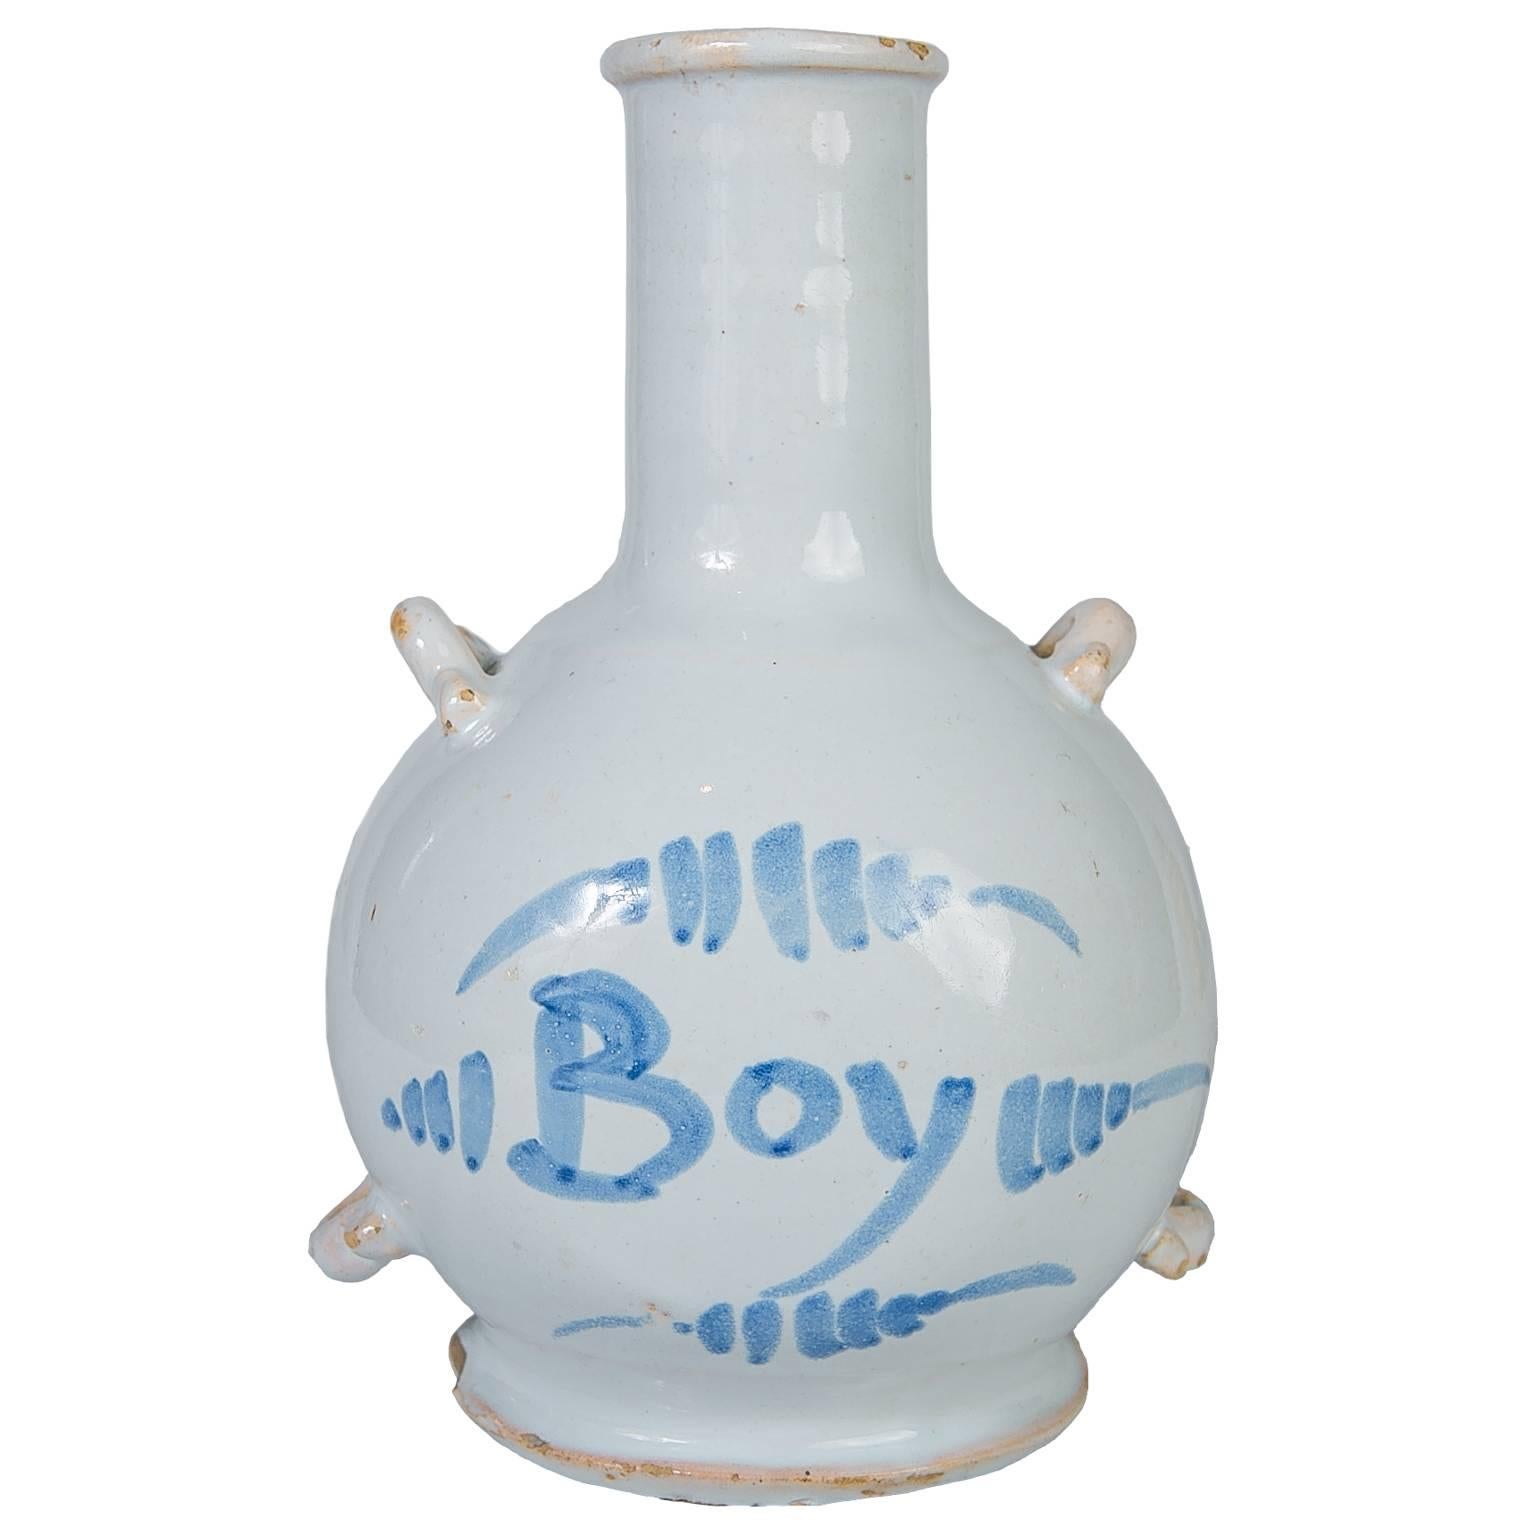 Blue and White Bottle Named "Boy" Made circa 1750